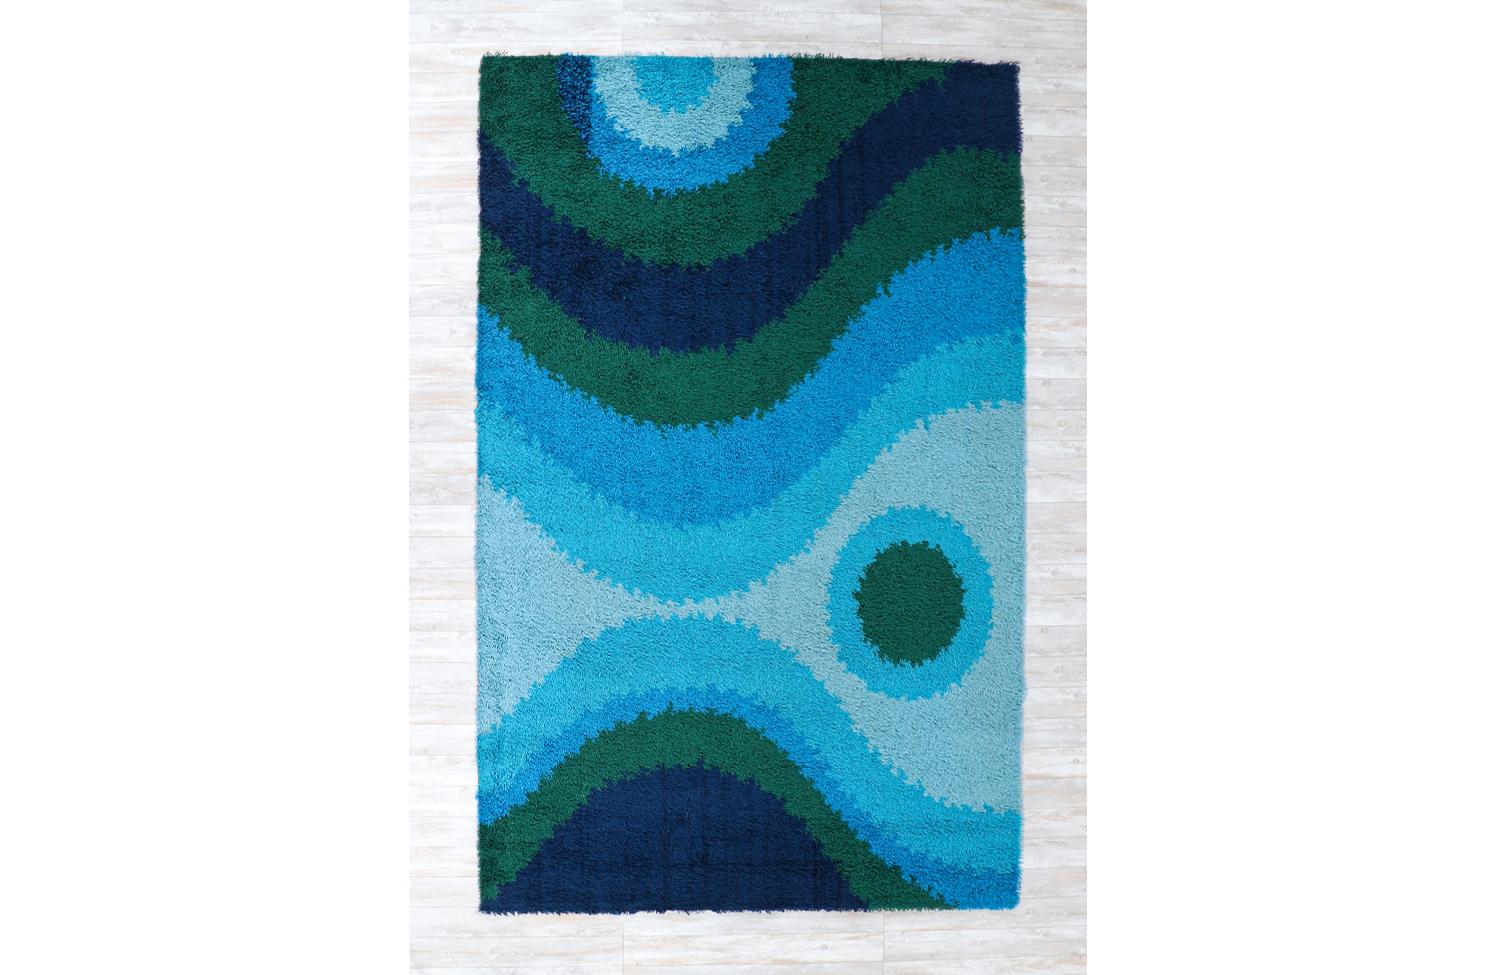 Large Danish Modern Hand-Knotted Blue/Green Wool Rug by Rya 1